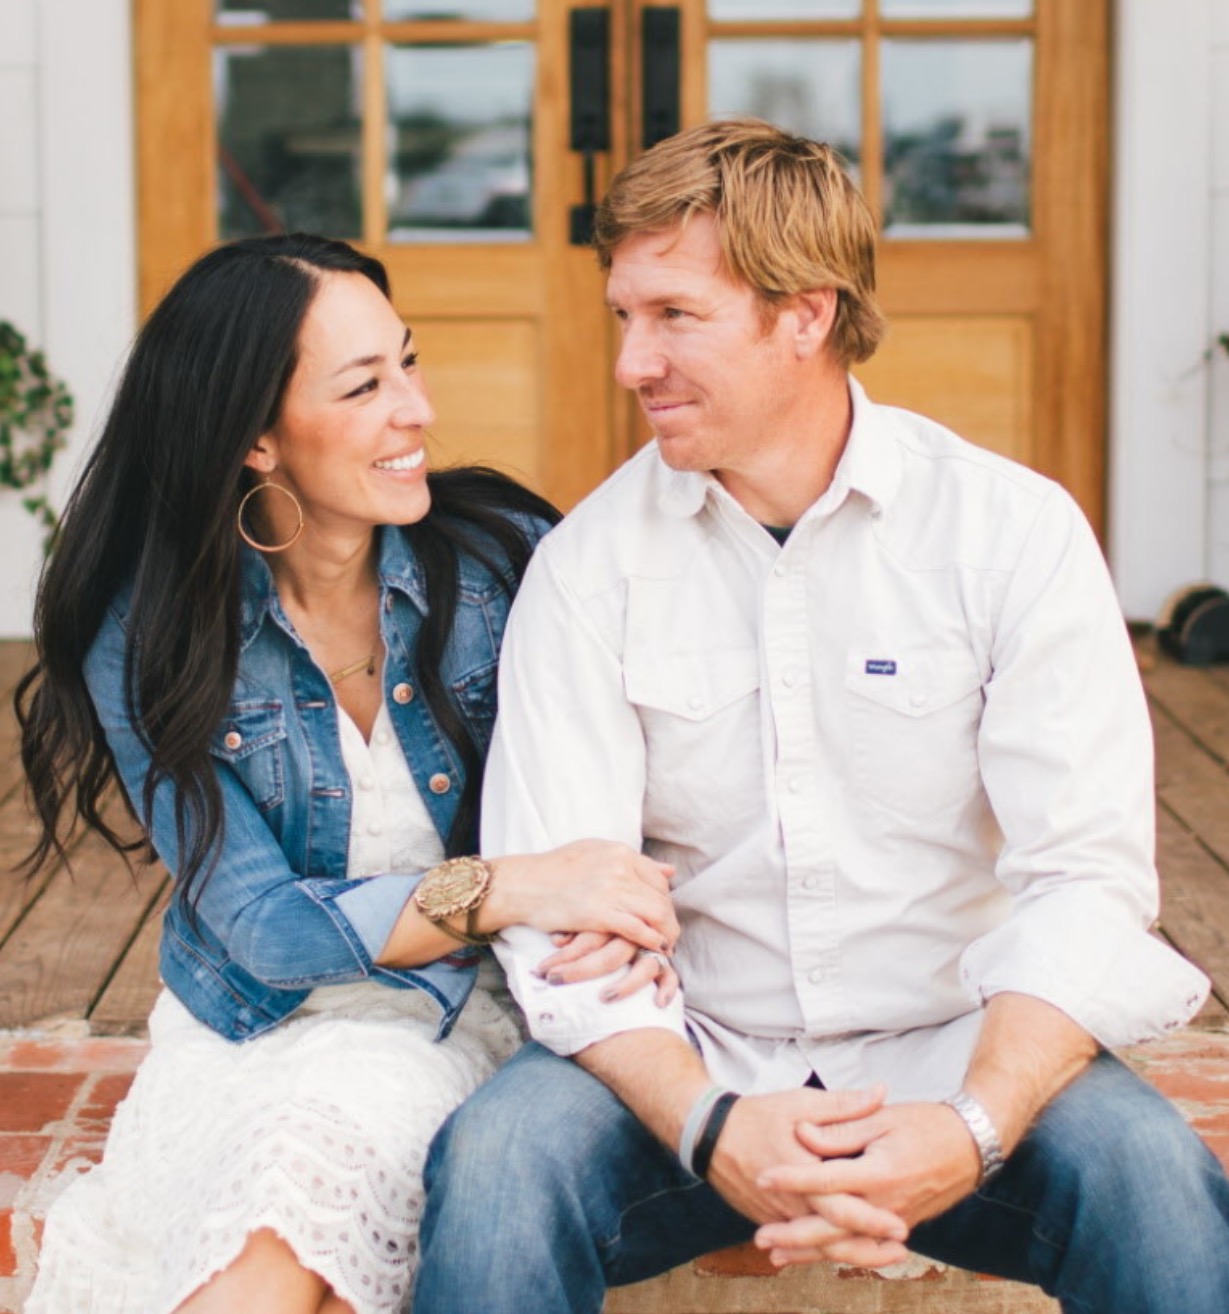 THR Cover Story: Chip and Joanna Gaines on 'Fixer Upper